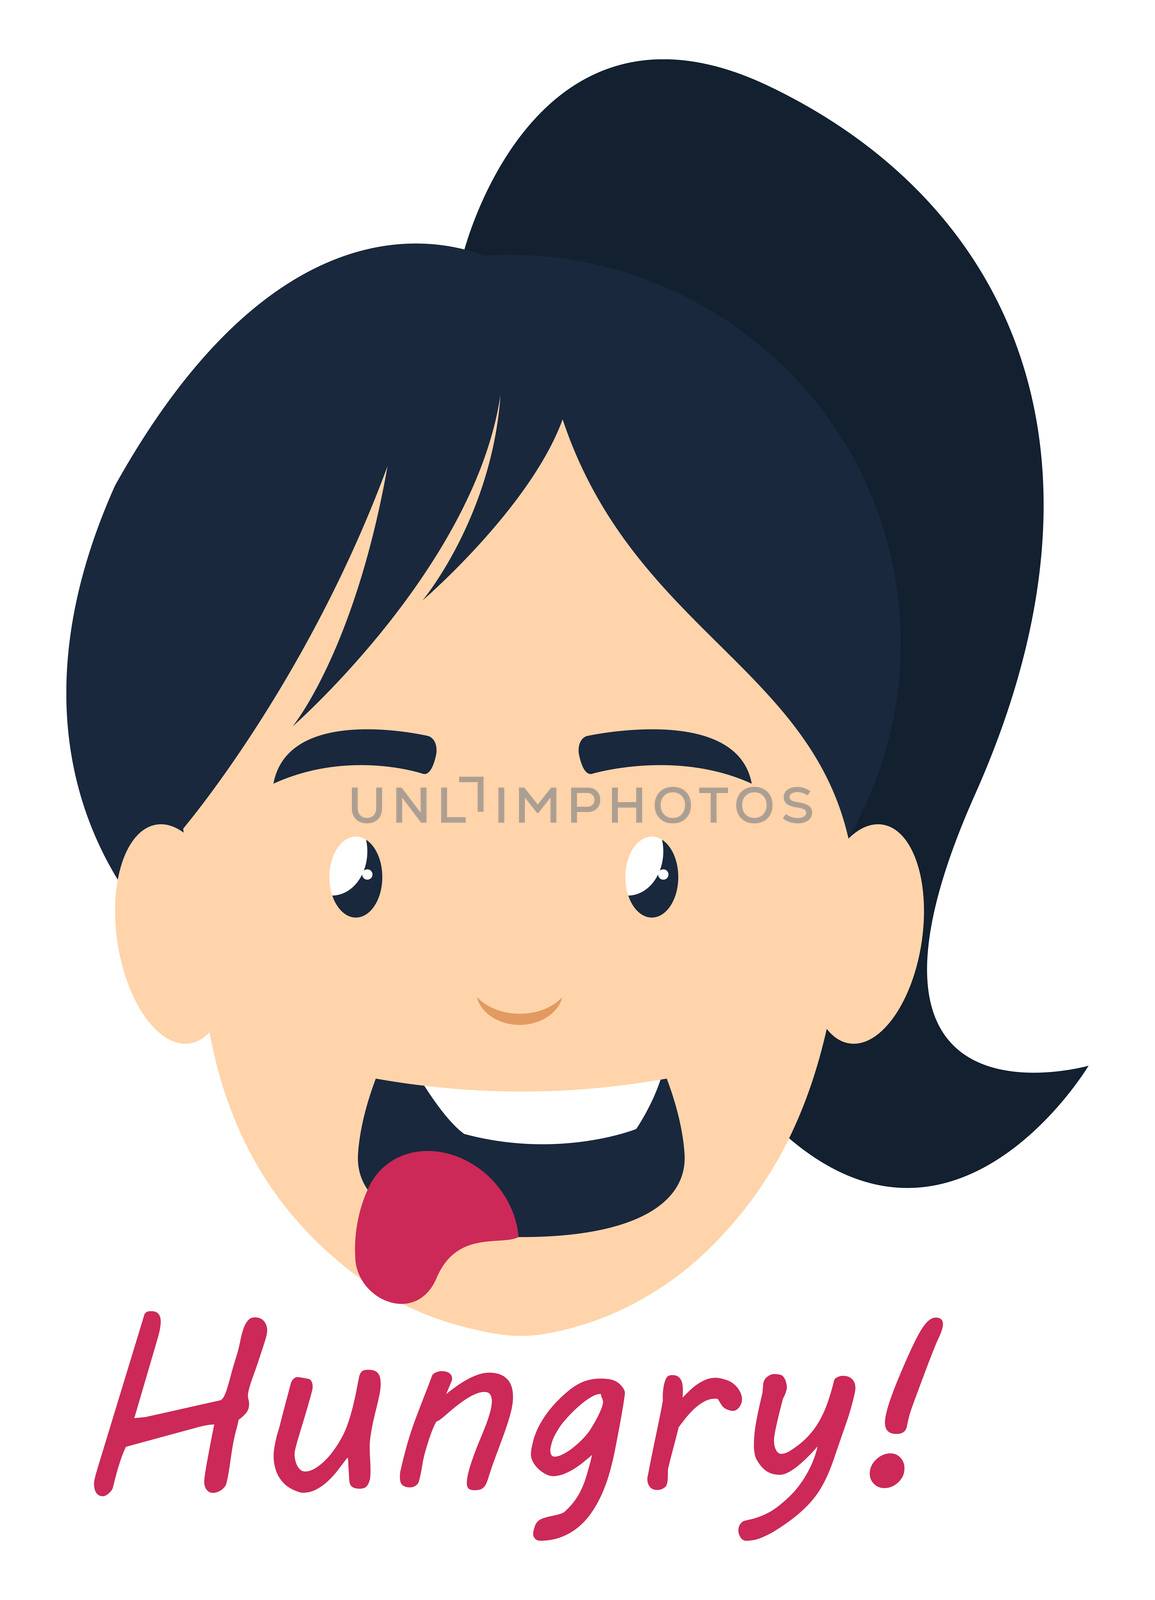 Hungry girl, illustration, vector on white background